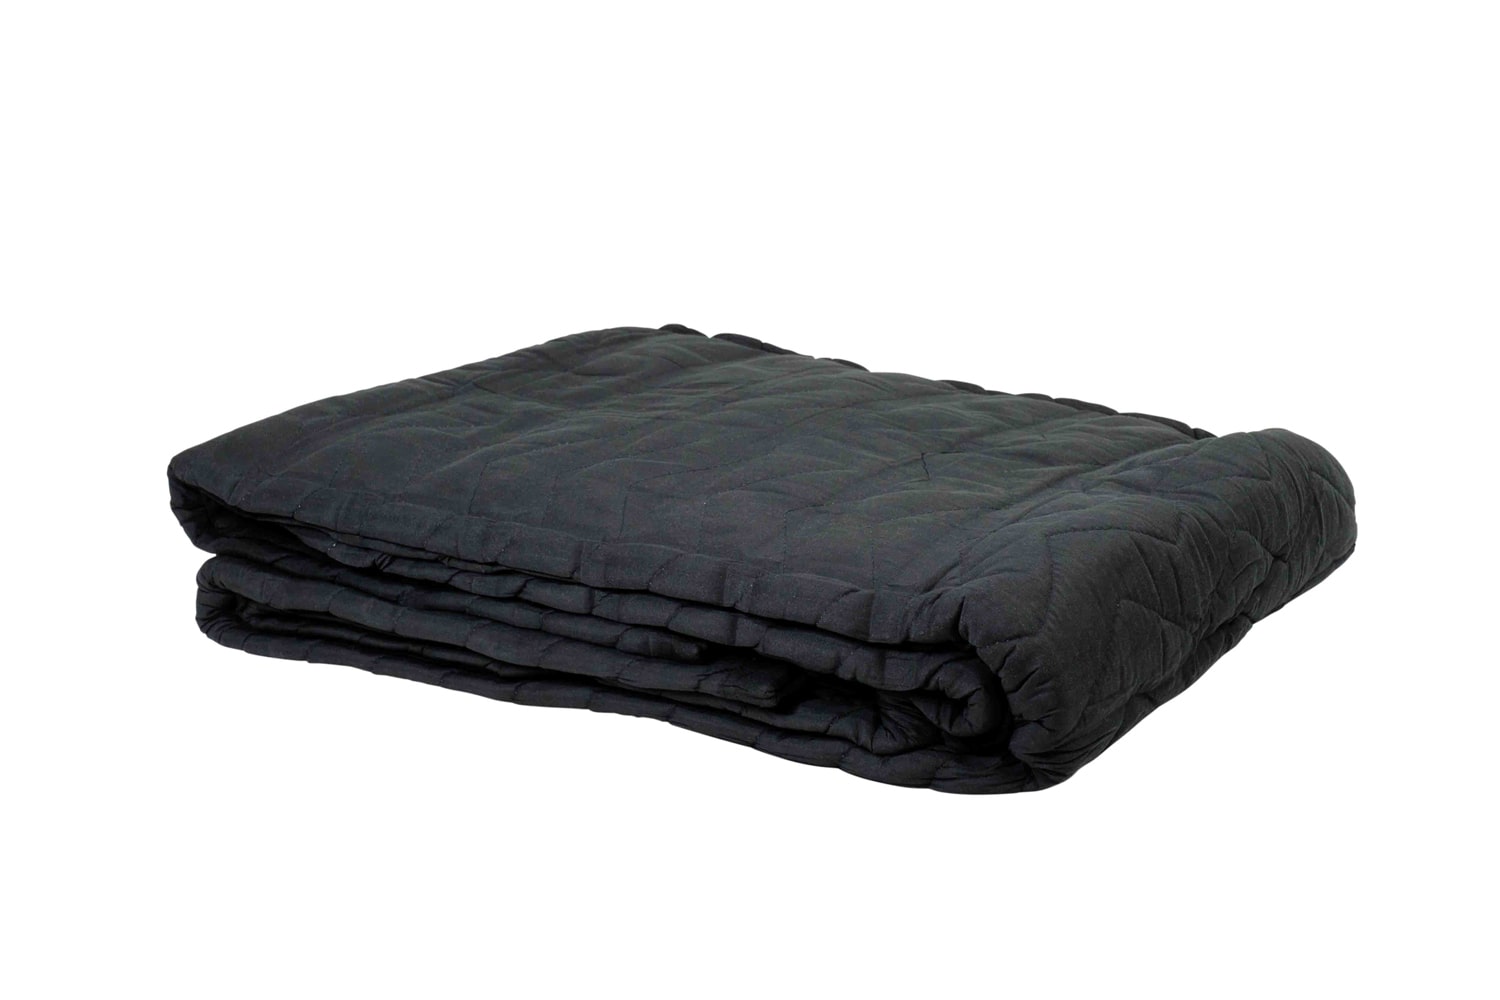 2 Pack) Small Sound Blanket - 48” x 48” Black Grommeted Sound